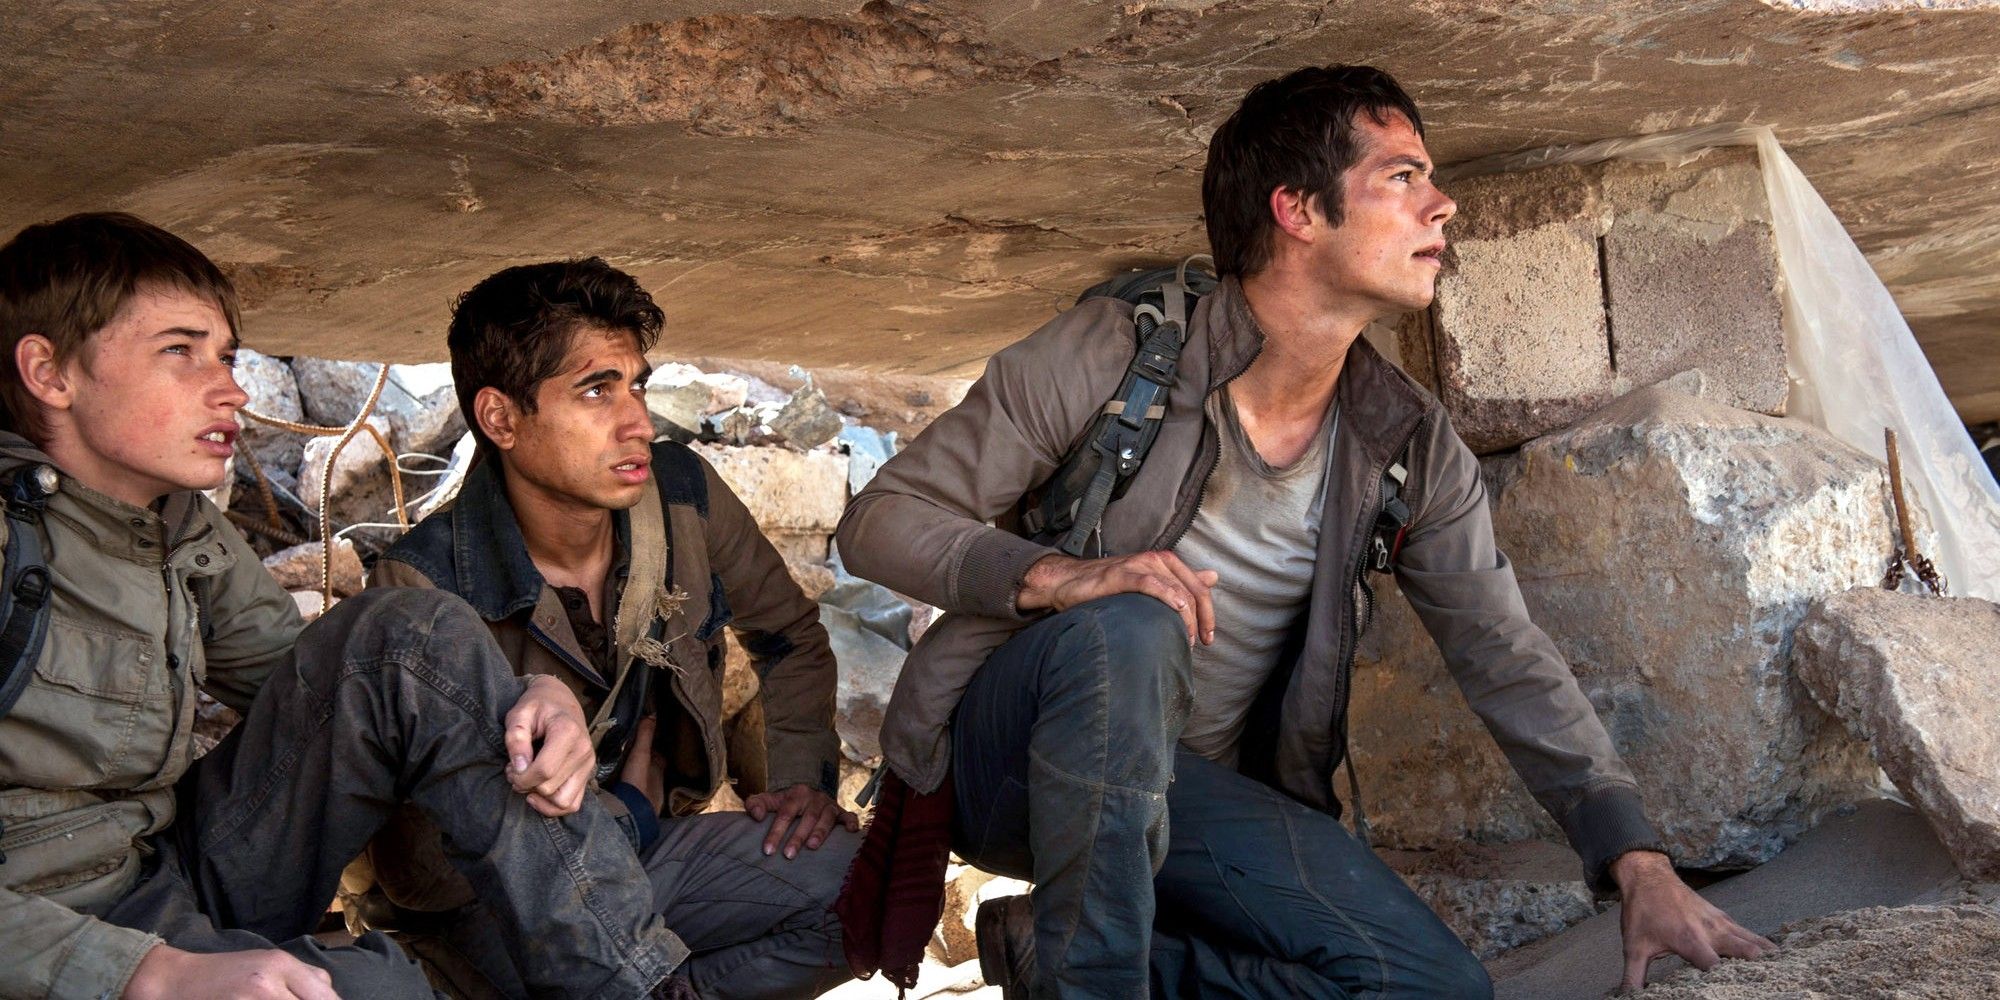 Gladers and Thomas in the Scorch in Maze Runner The Scorch Trials